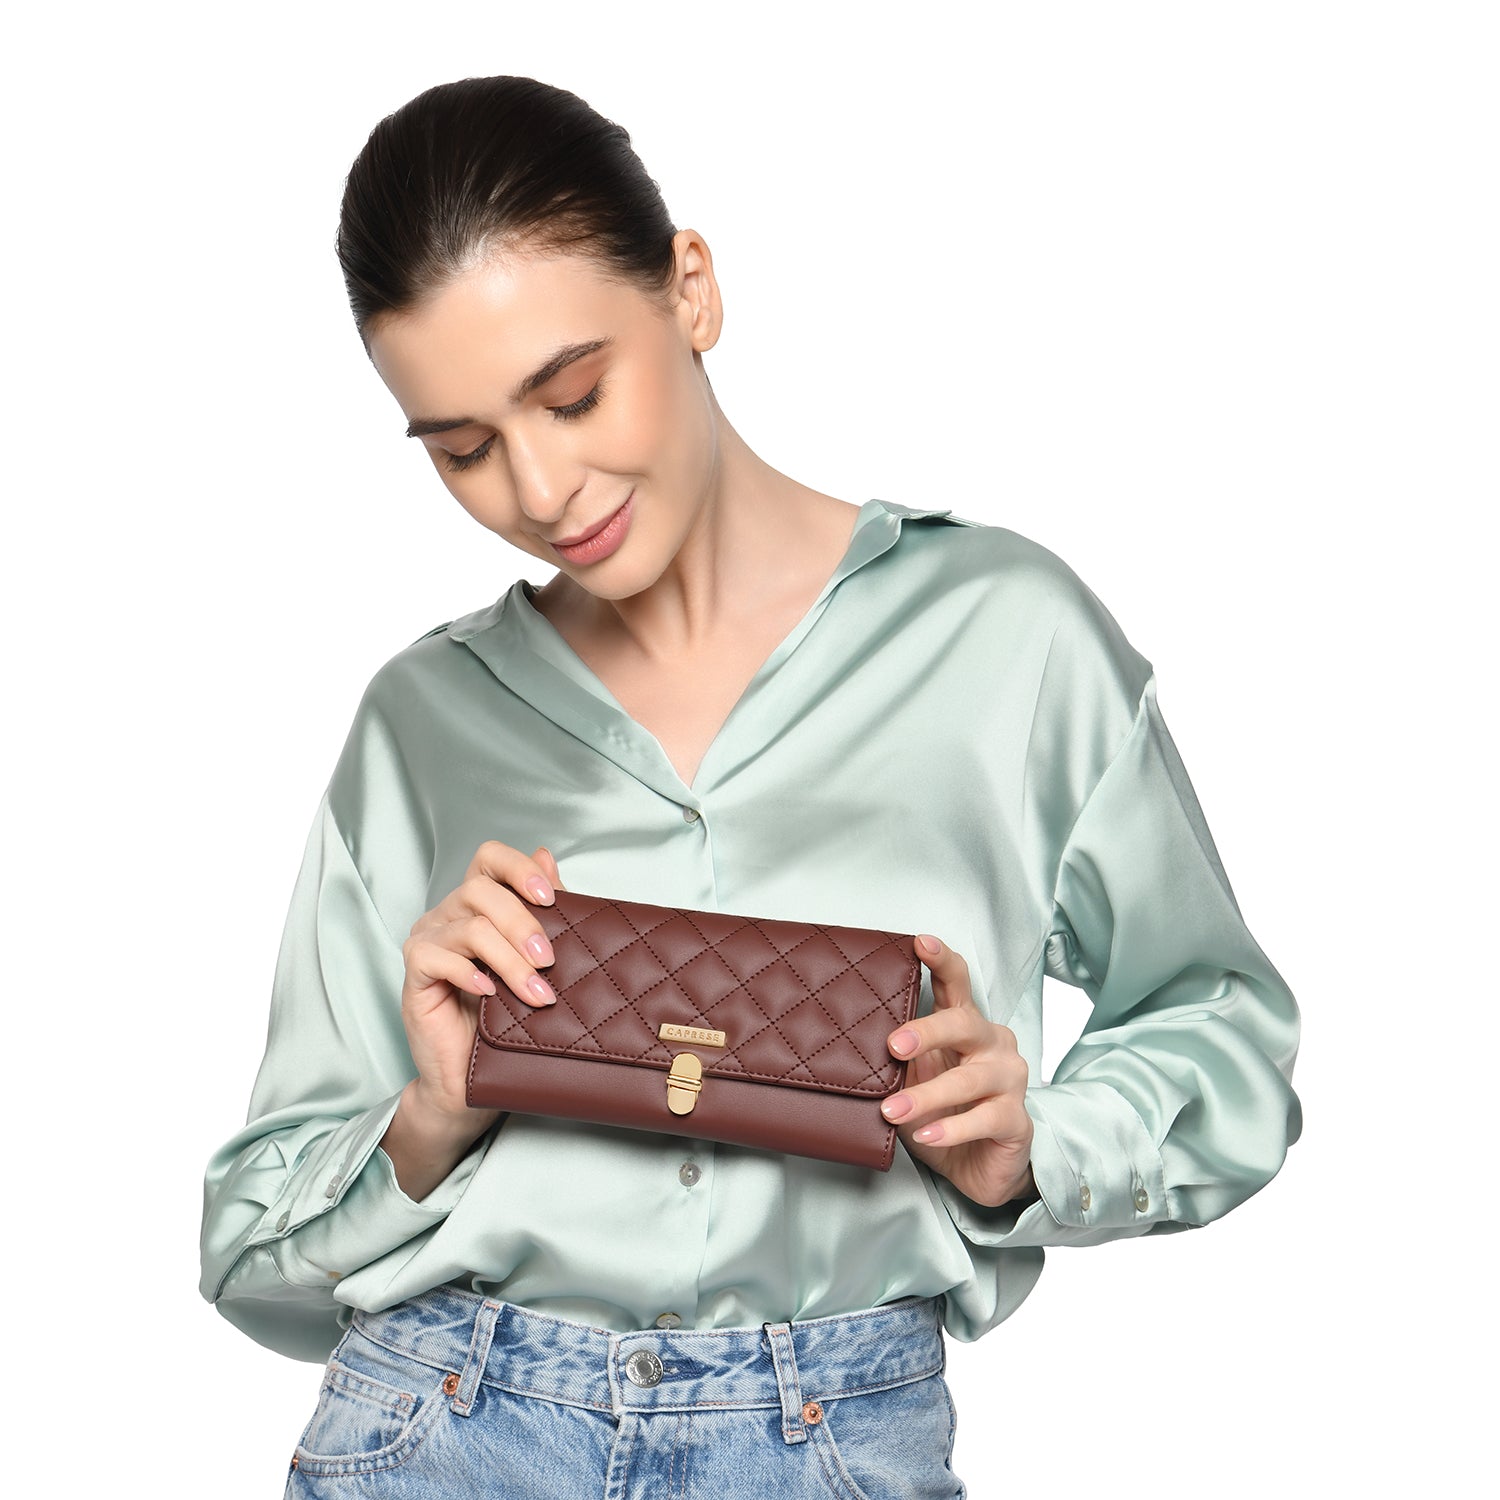 Women's Bags | The Latest Trends Online - Brownie Spain